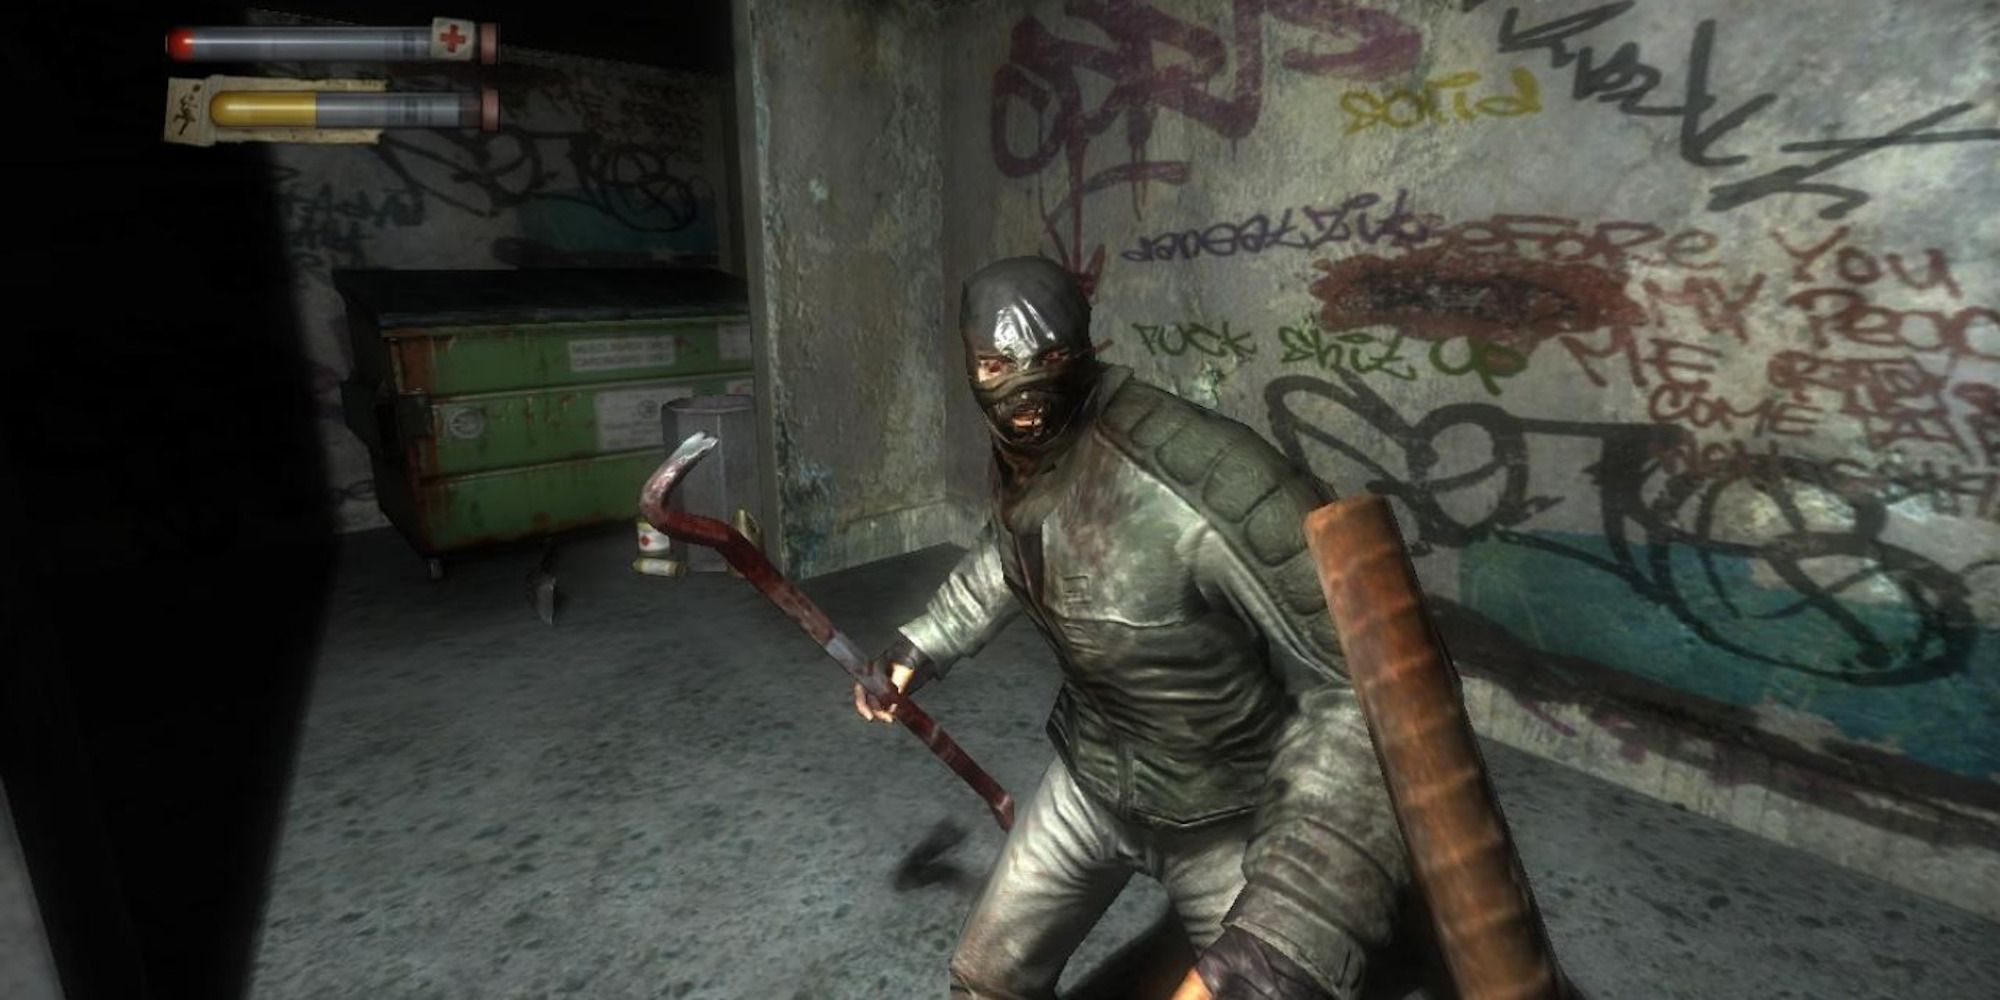 Player character brandishes a melee weapon against a masked assailant